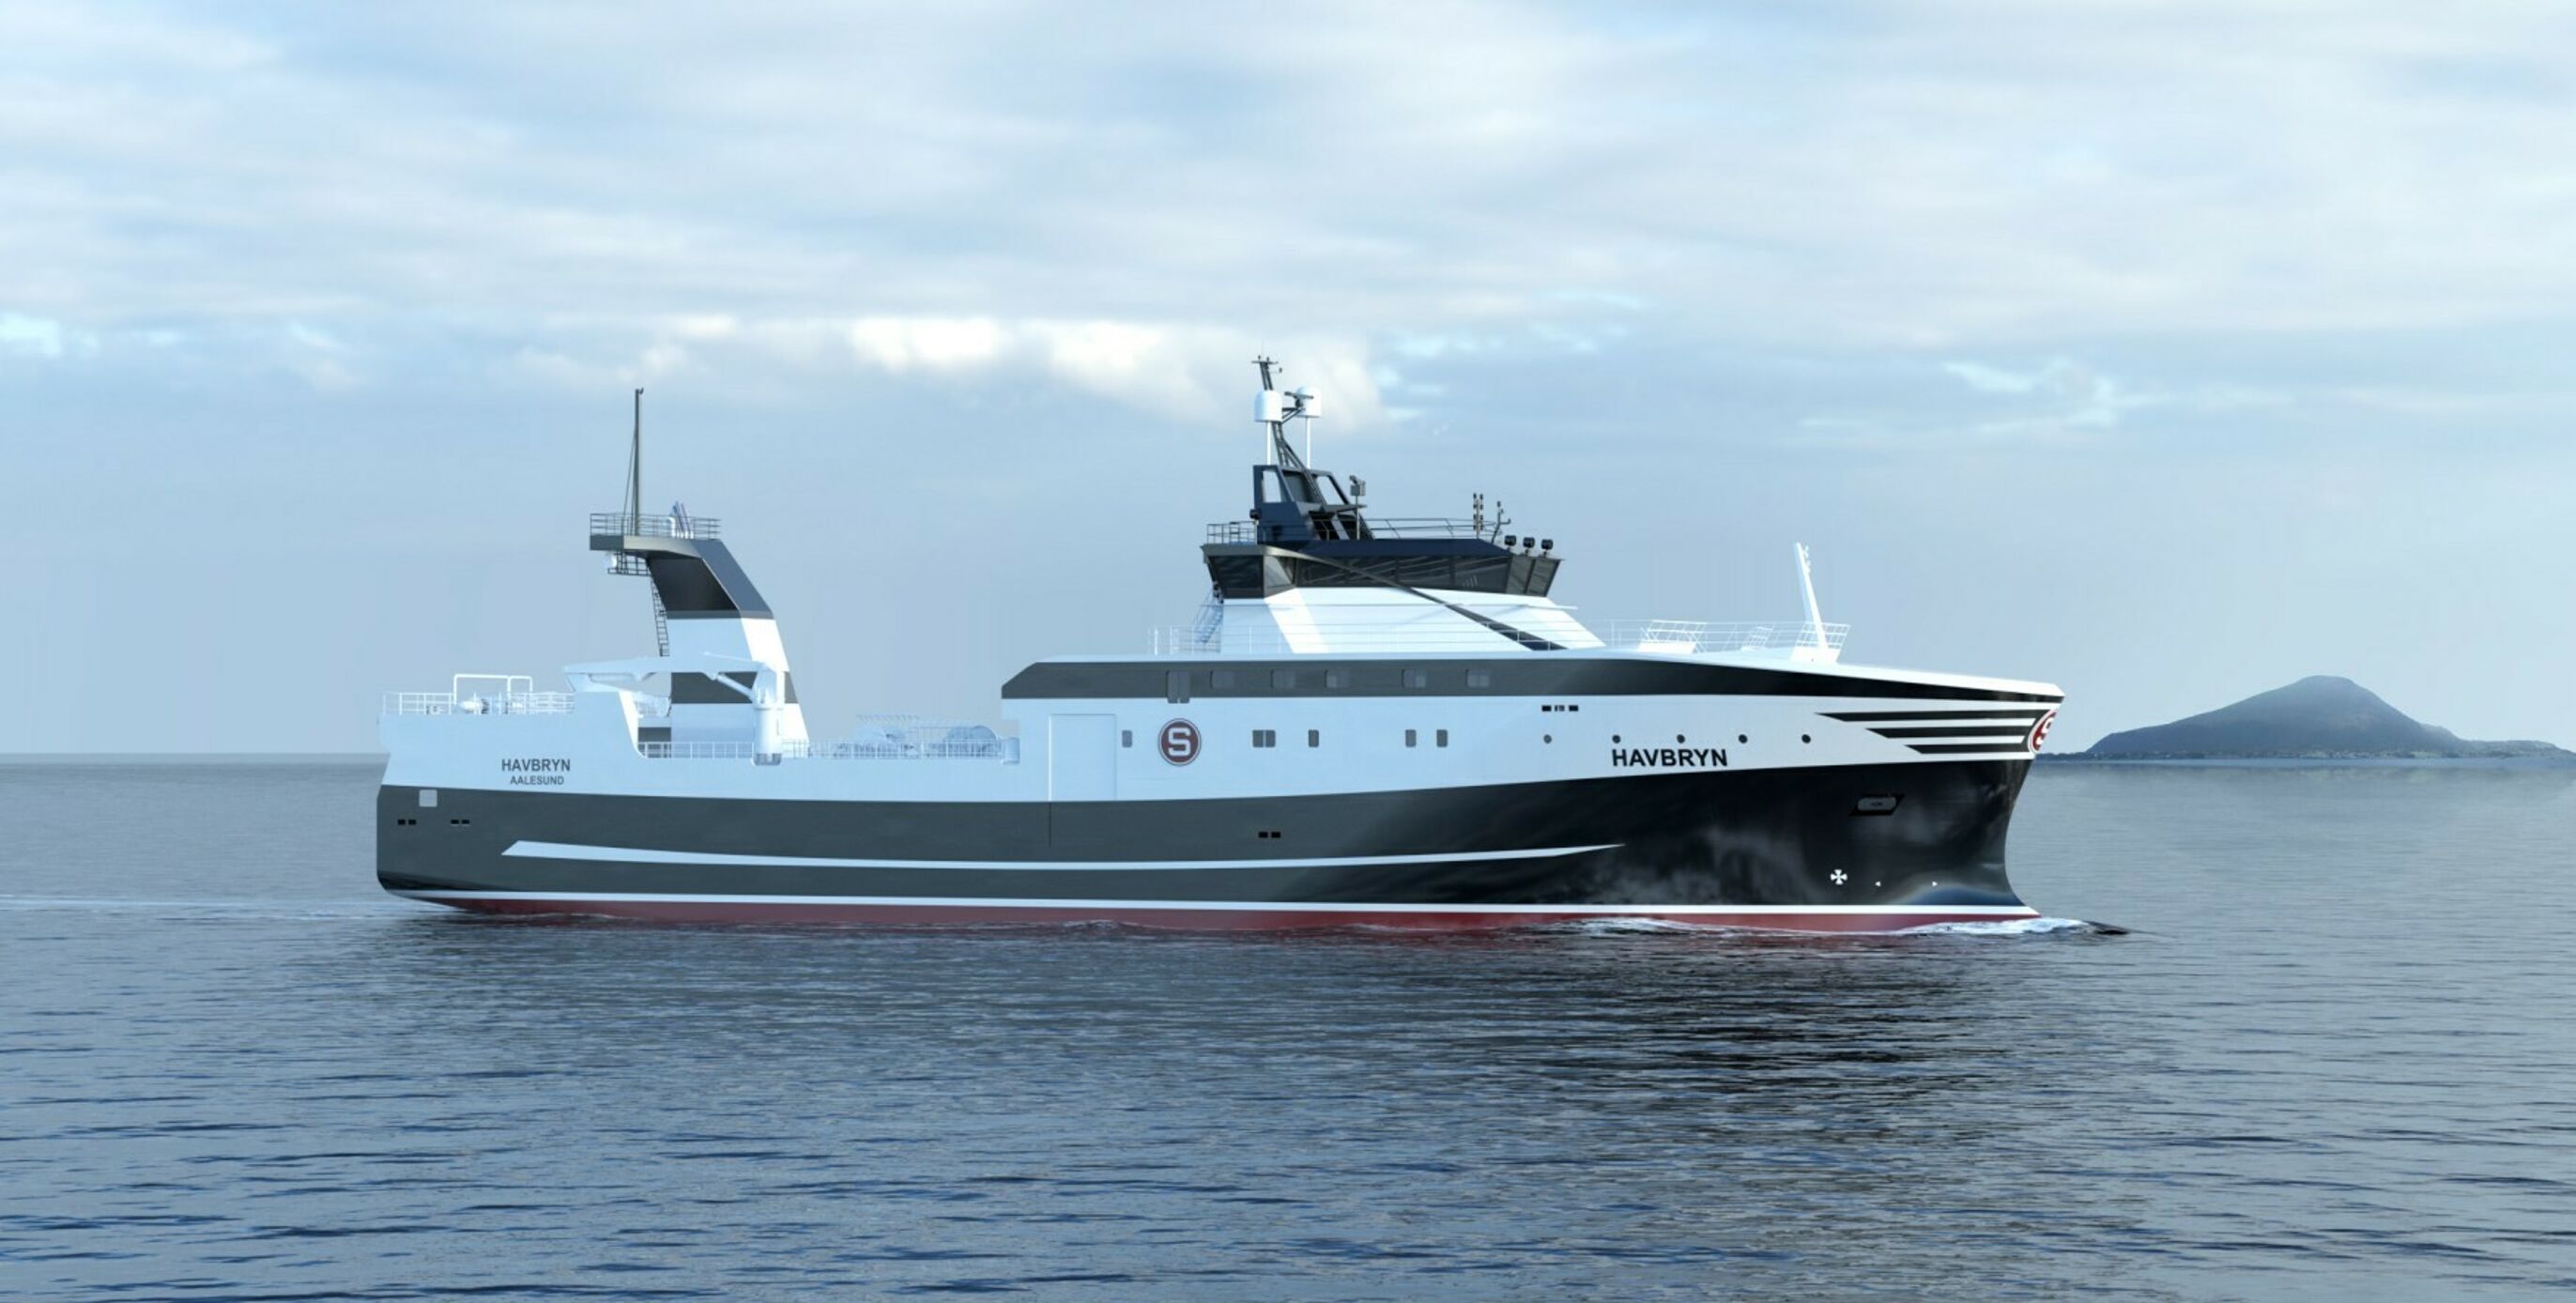 VARD Secures Contract for One Stern Trawler for Havbryn AS